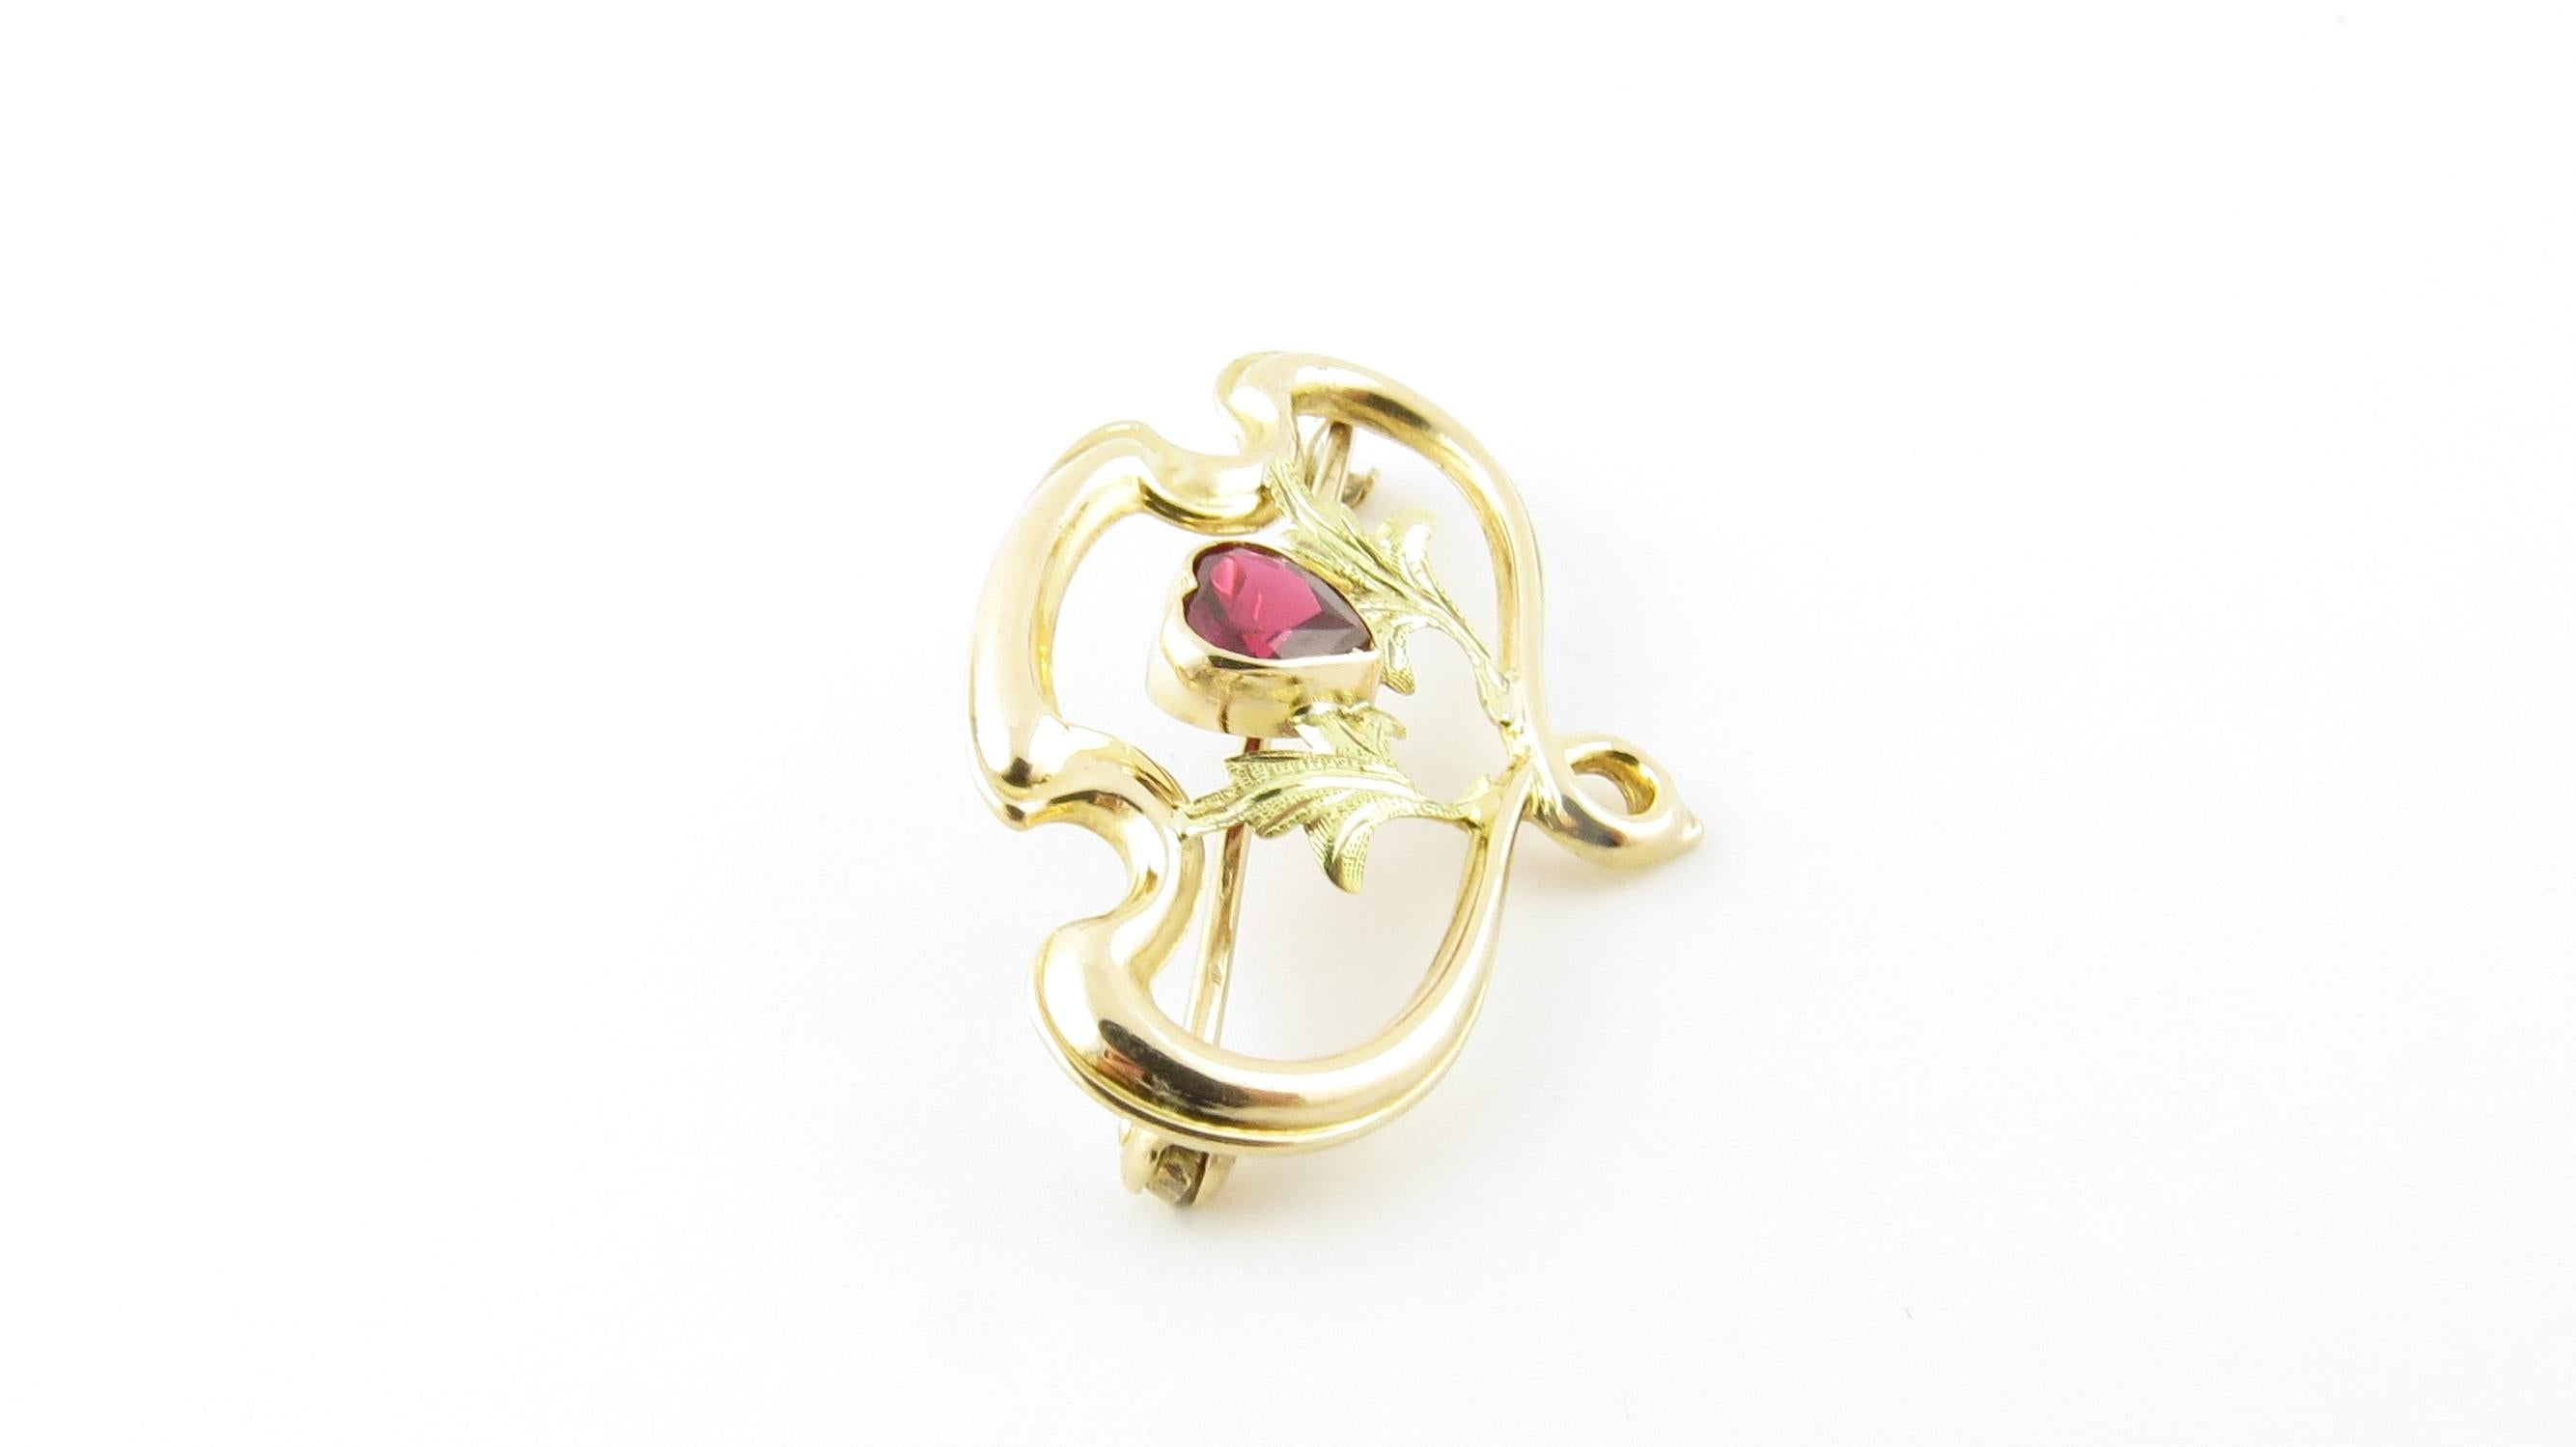 Women's Vintage 10 Karat Yellow Gold and Synthetic Ruby Brooch or Pin #4353